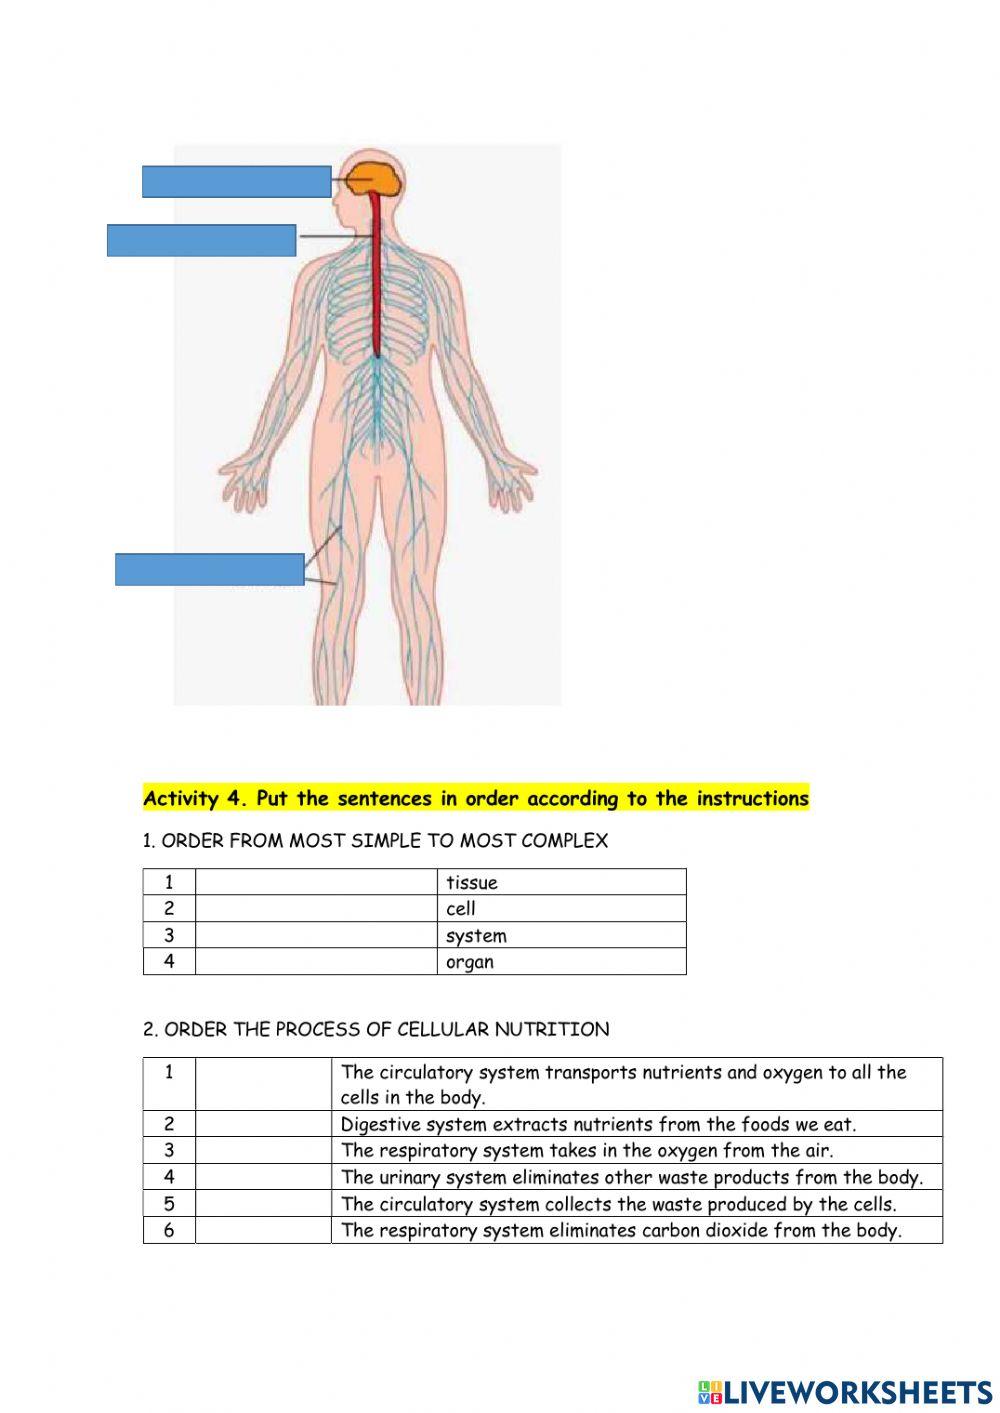 Human body systems review